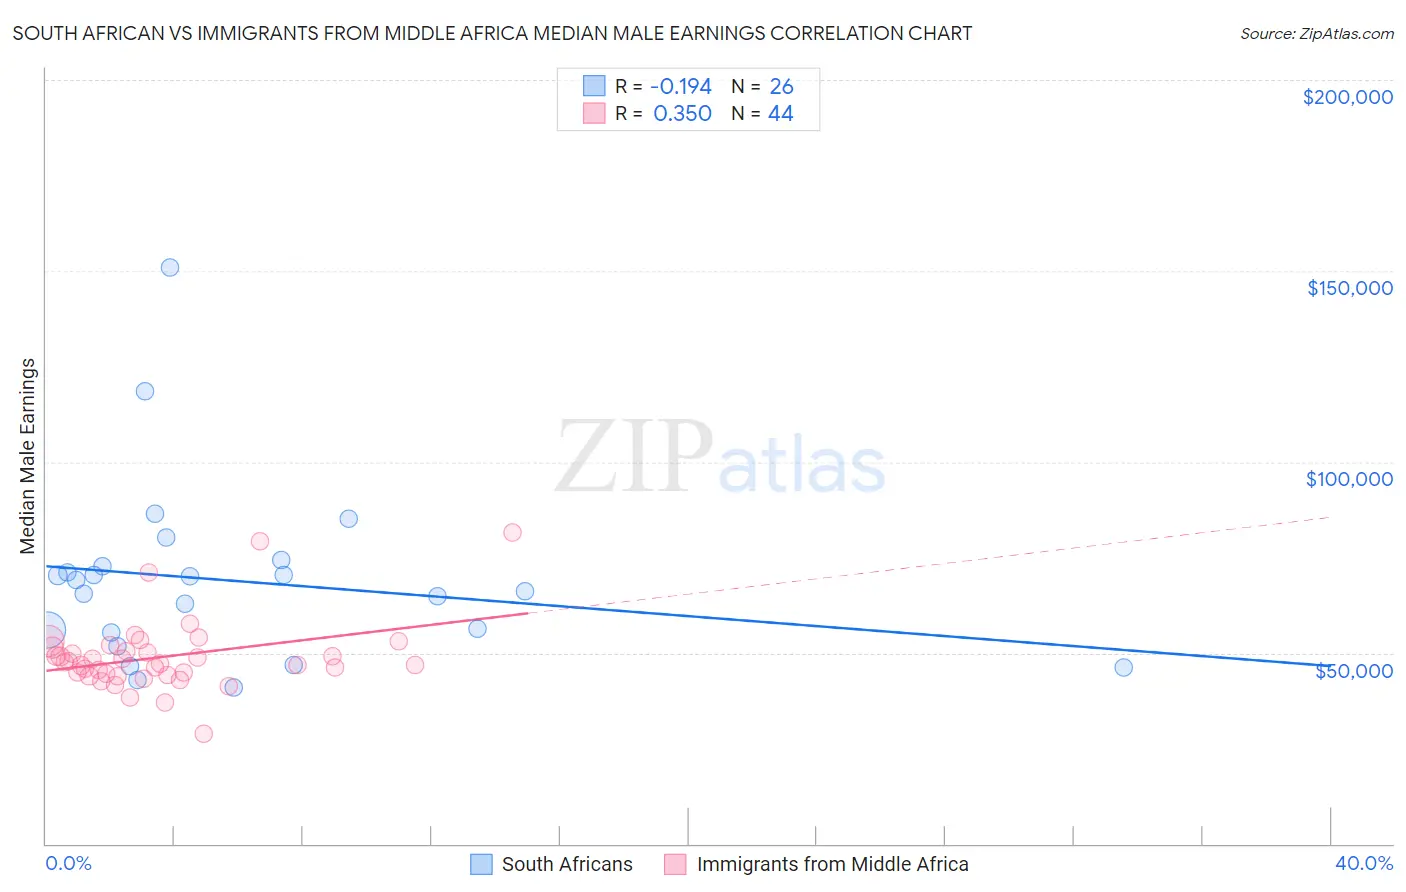 South African vs Immigrants from Middle Africa Median Male Earnings